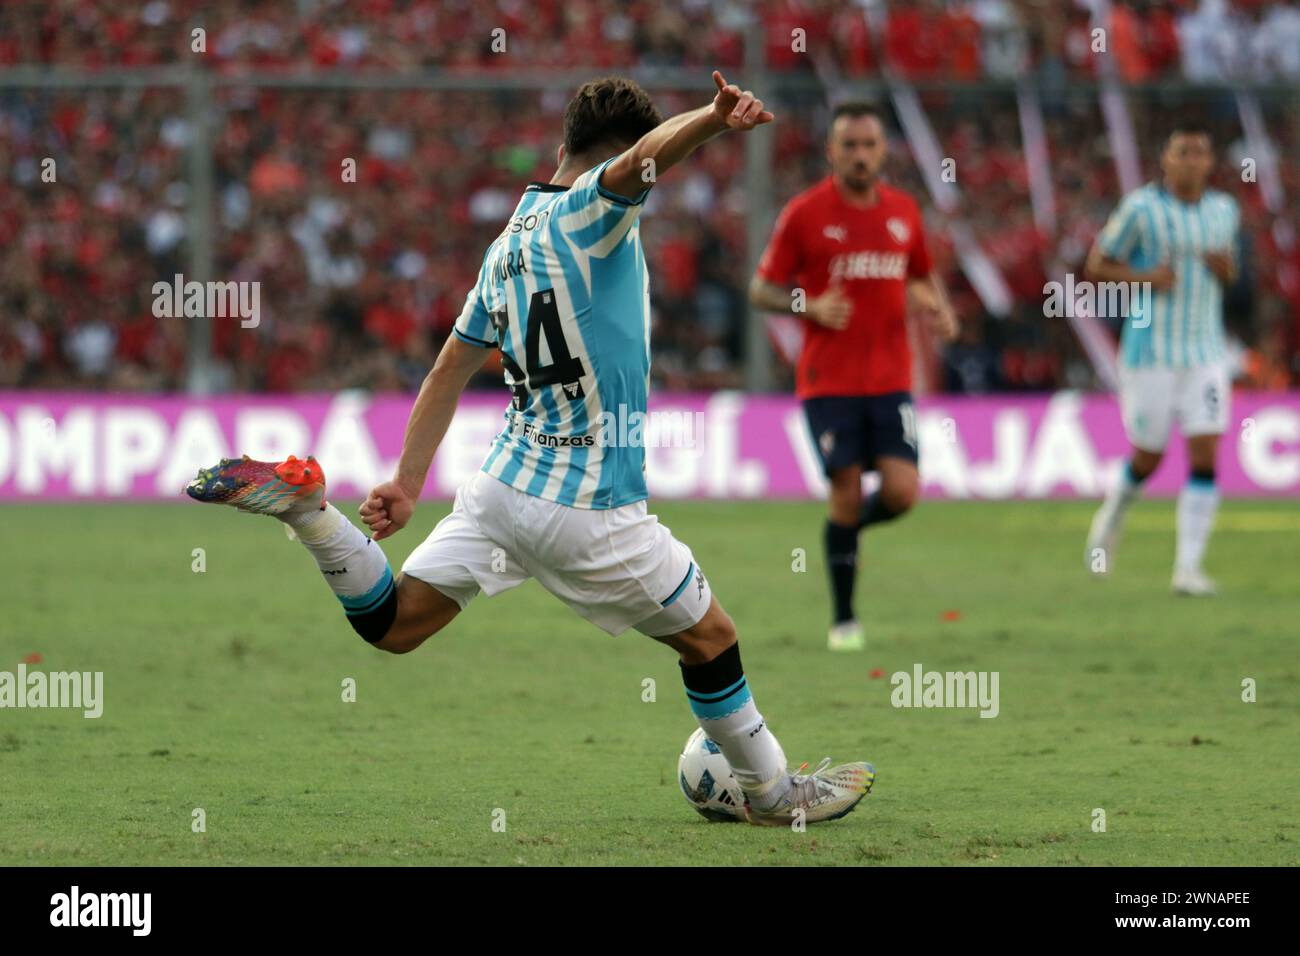 Avellaneda, Argentina, 24, February, 2024. Facundo Mura shoots at goal during the match between Independiente vs Racing Club. Stock Photo